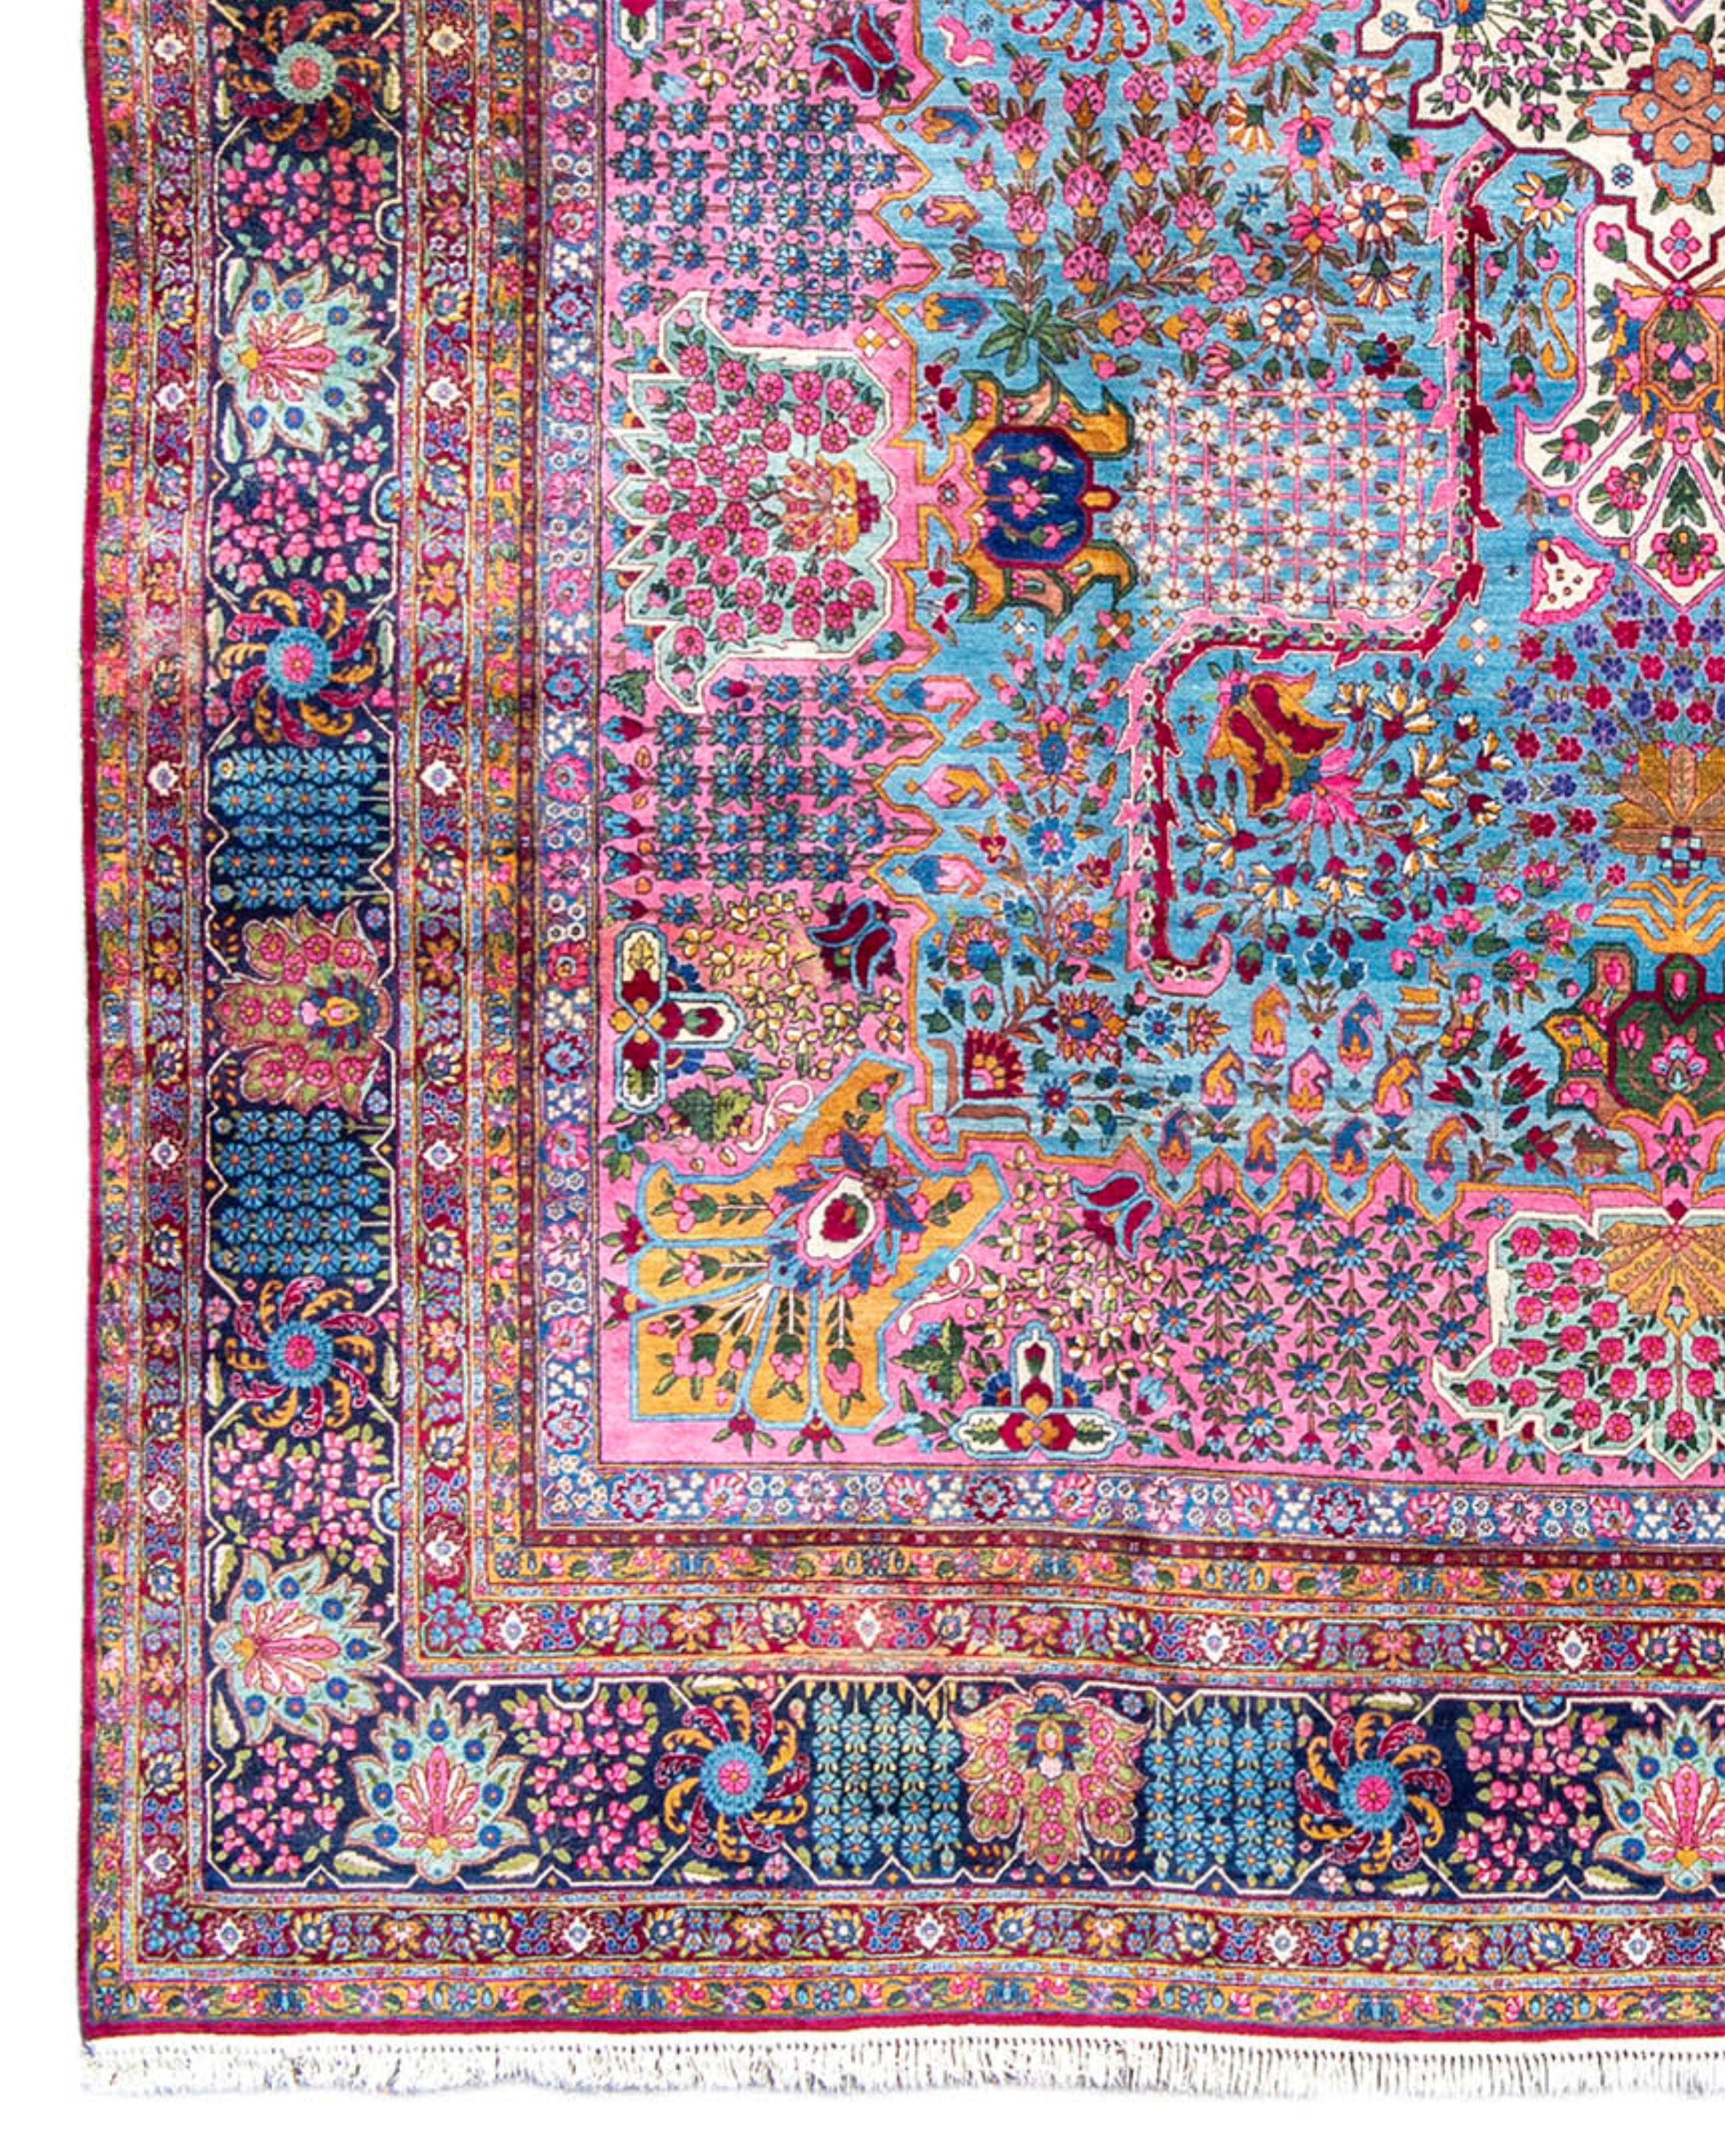 Hand-Woven Antique Large Persian Kirman Carpet, Early 20th century For Sale